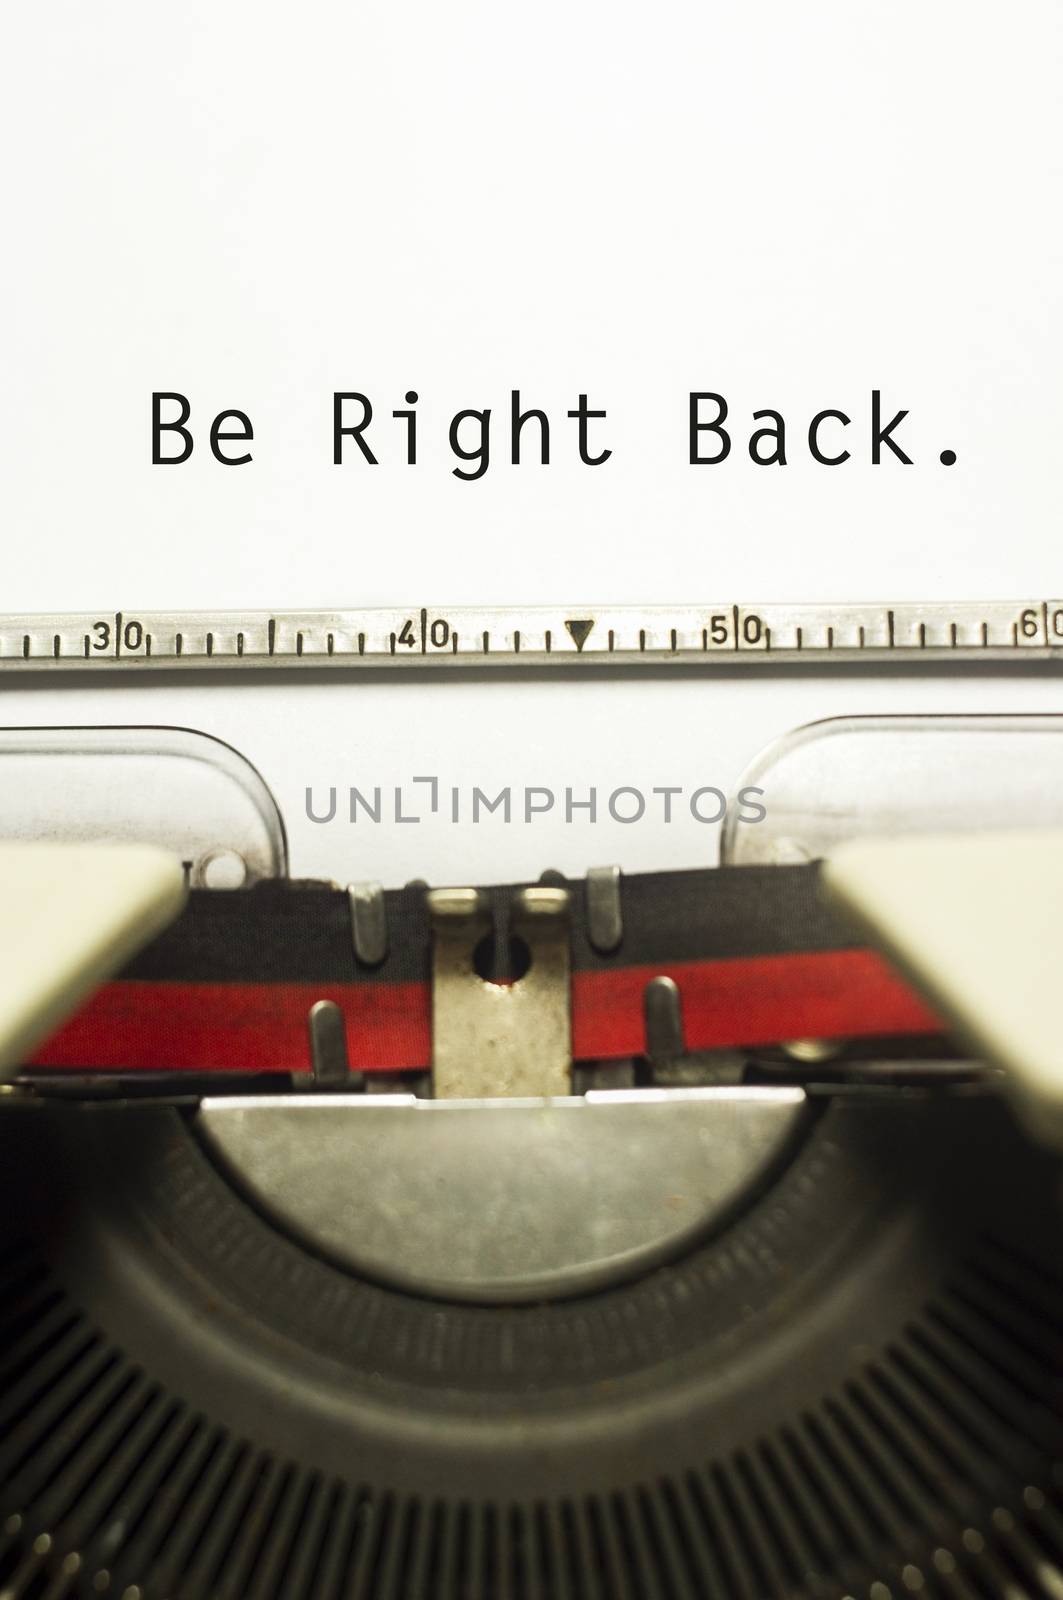 be right back concepts, with message on typewriter. For website maintenance message.